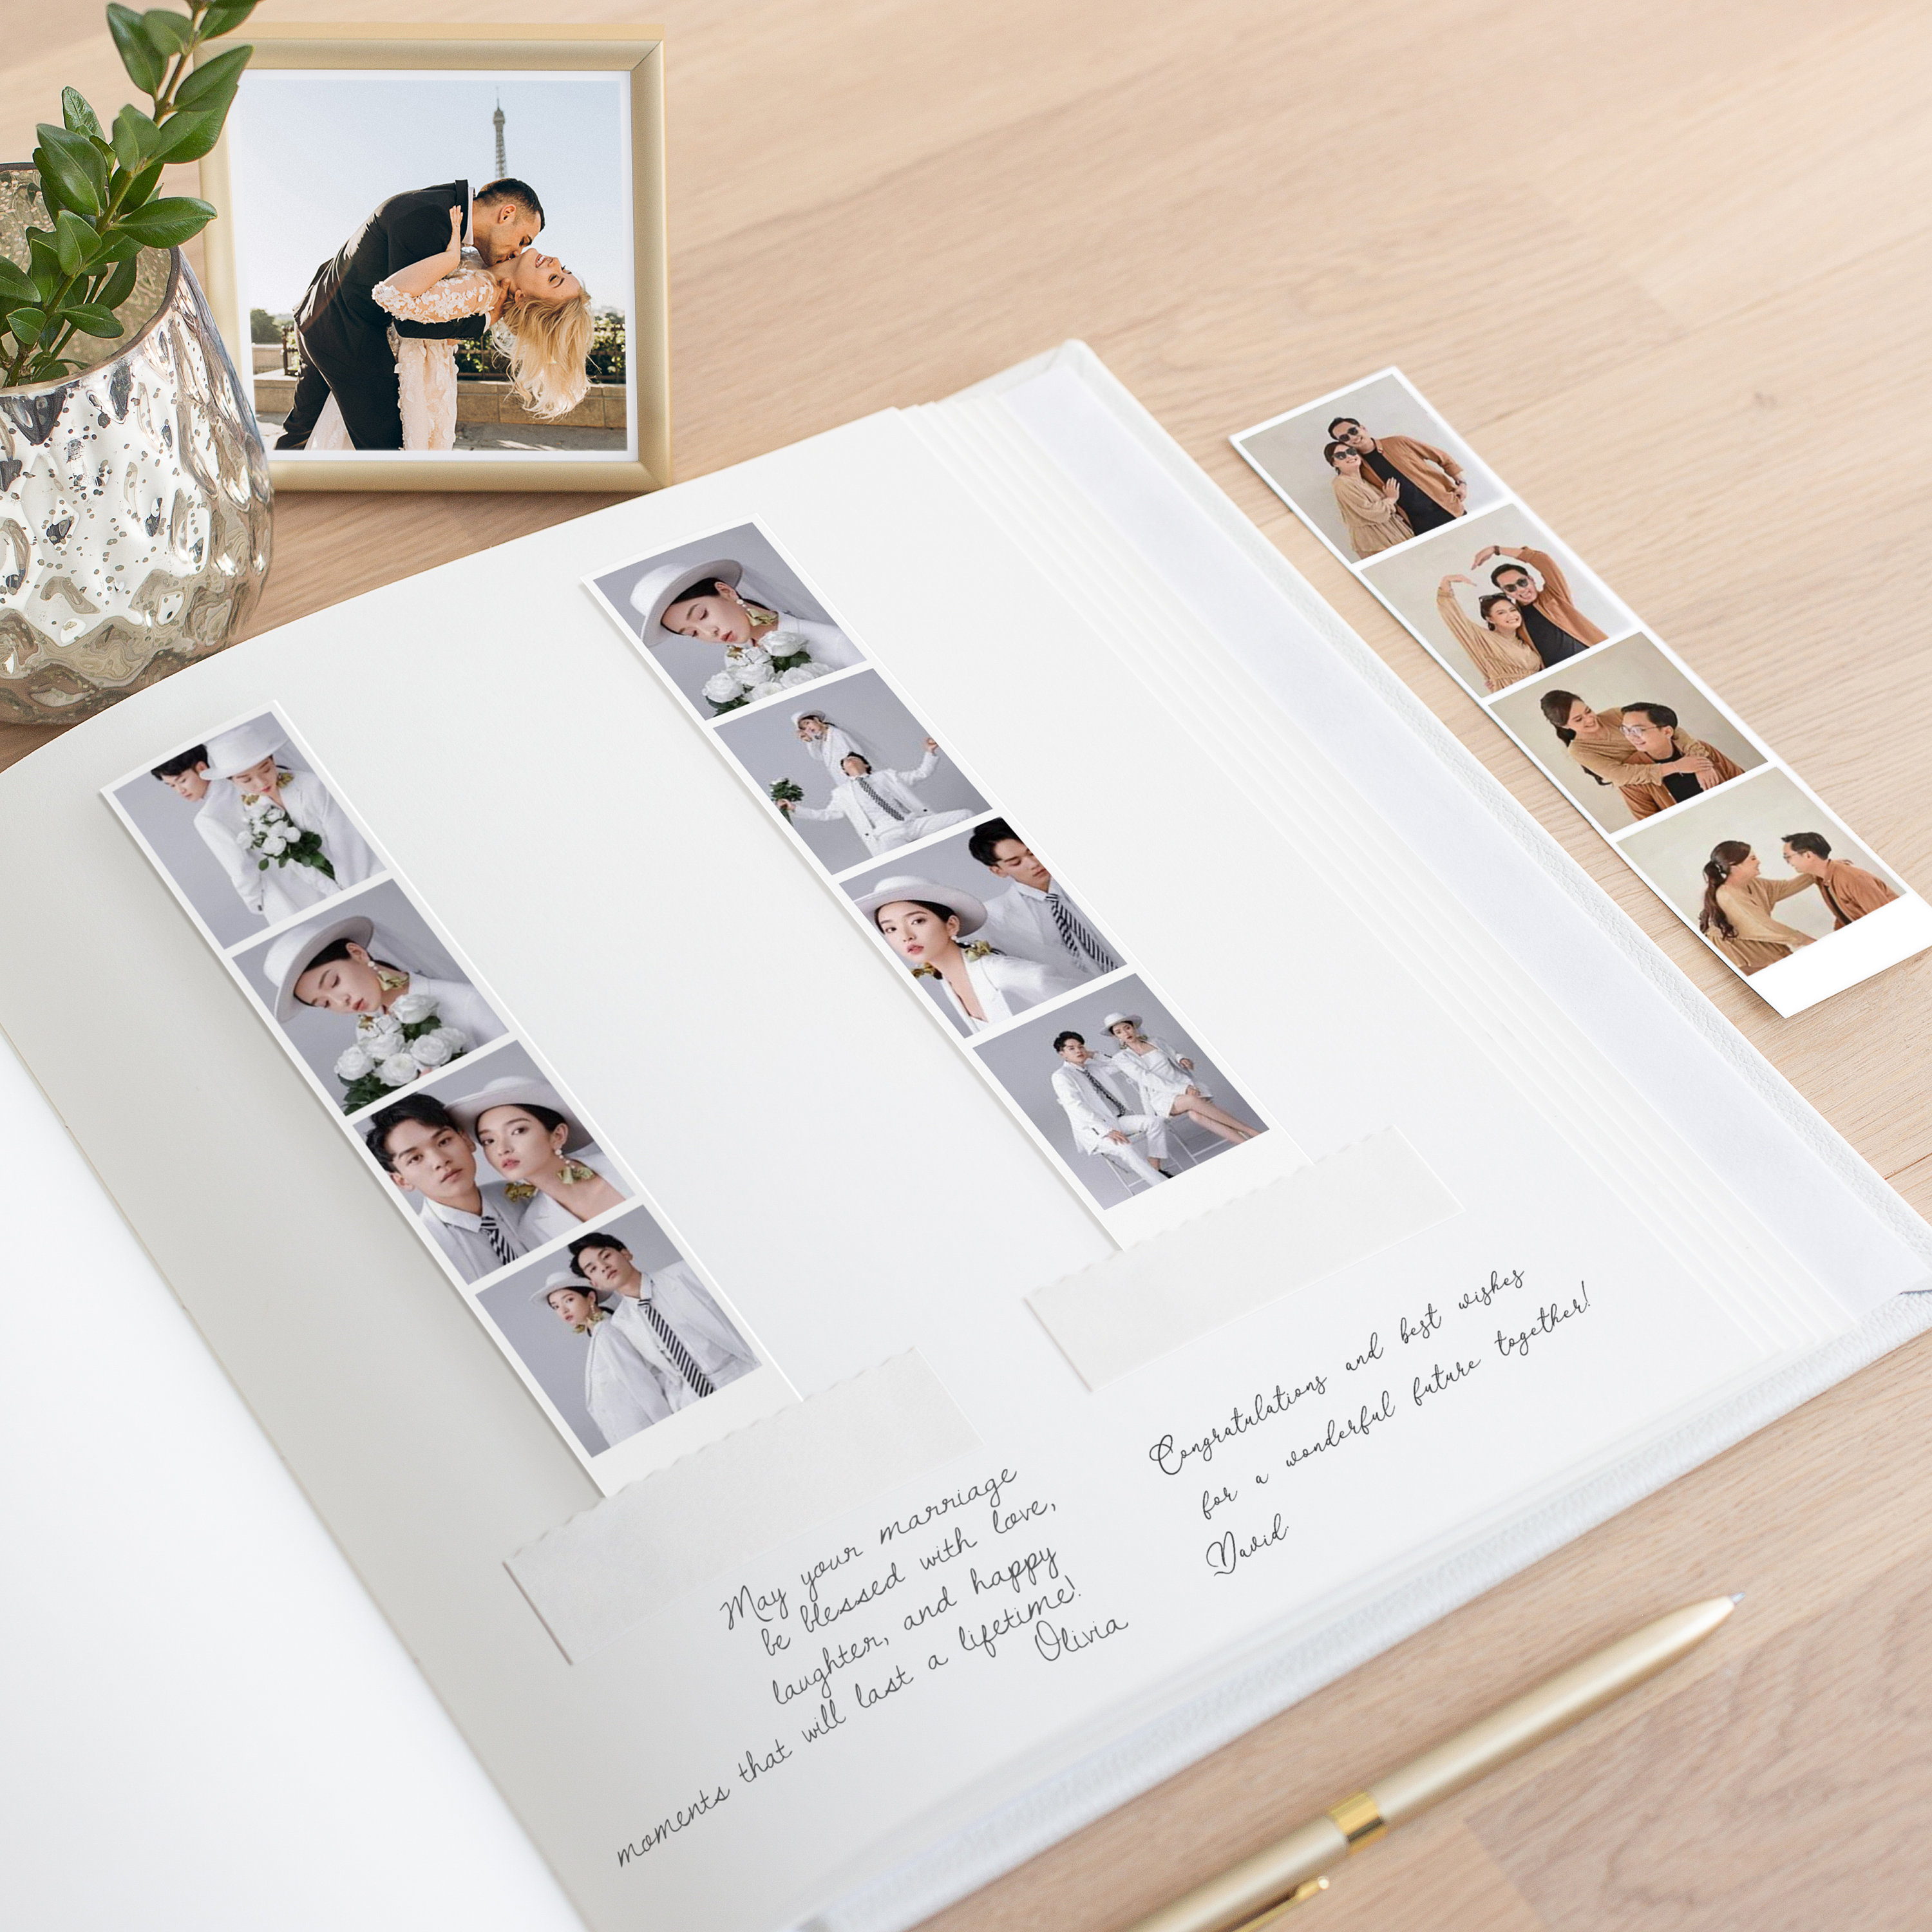 Wedding Guest book for Instax Pictures, Instax Weddin Guestbook